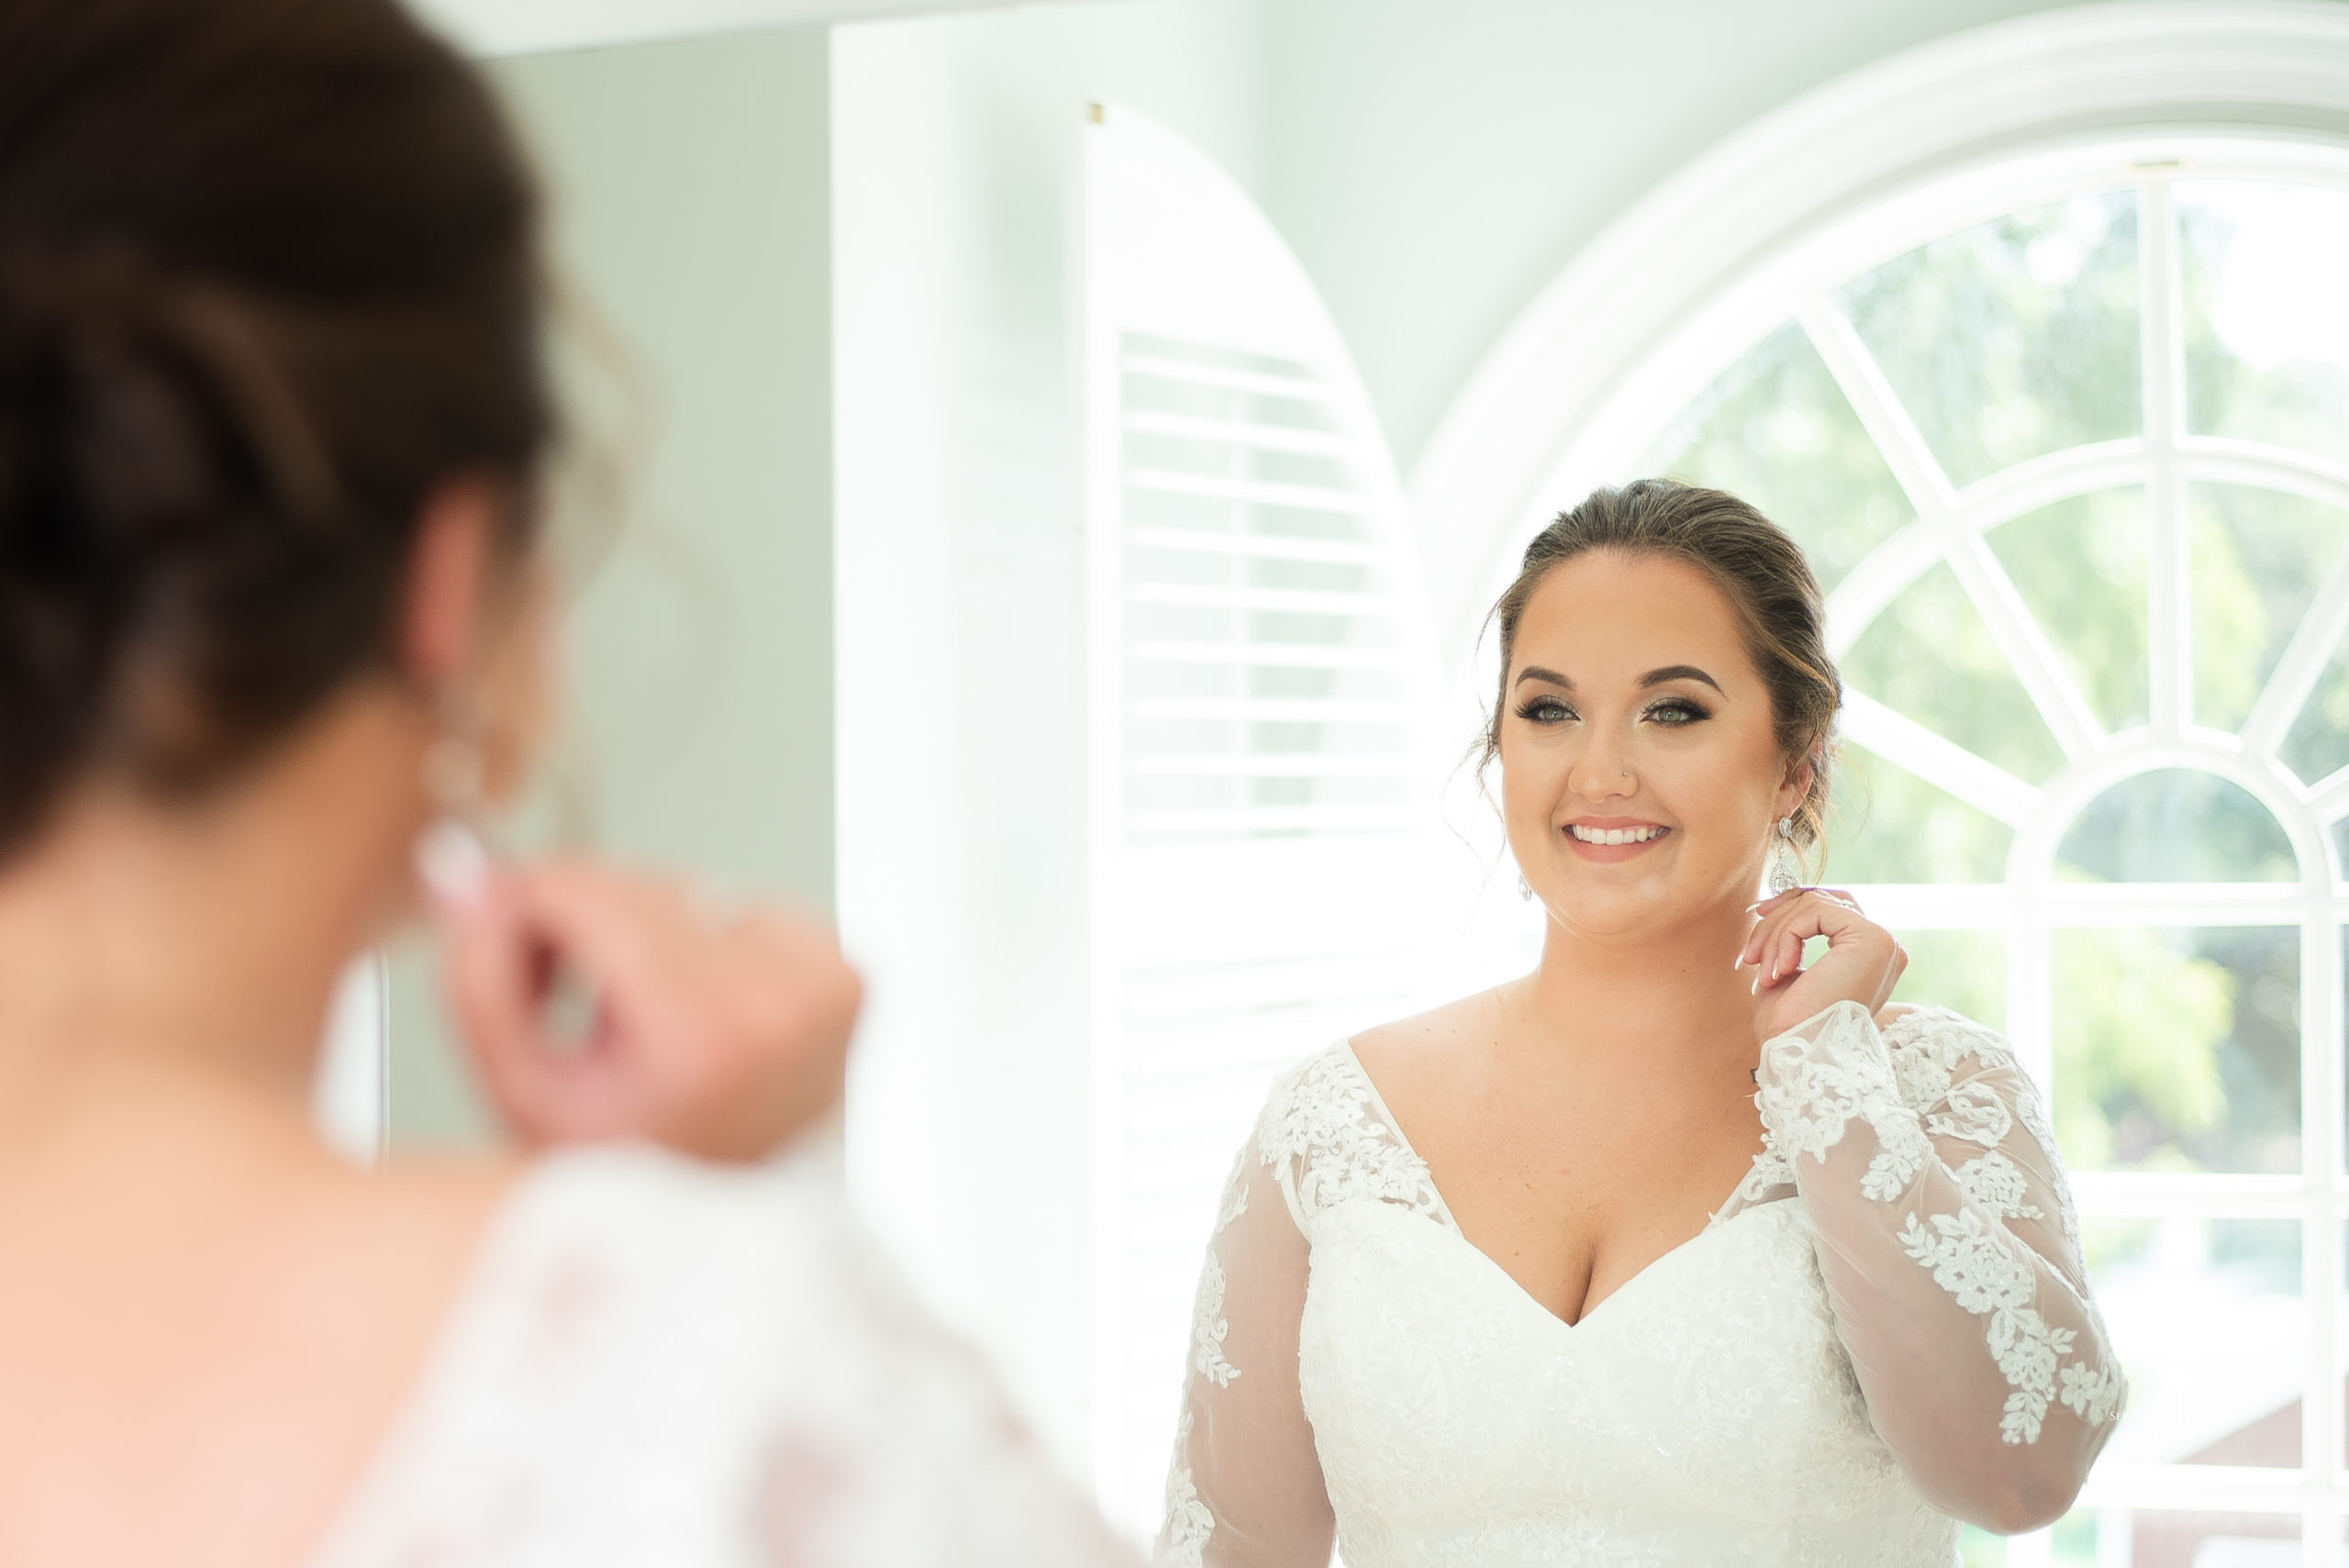 Samantha getting ready for her Blush, Navy and gold wedding at Walnut Hill.